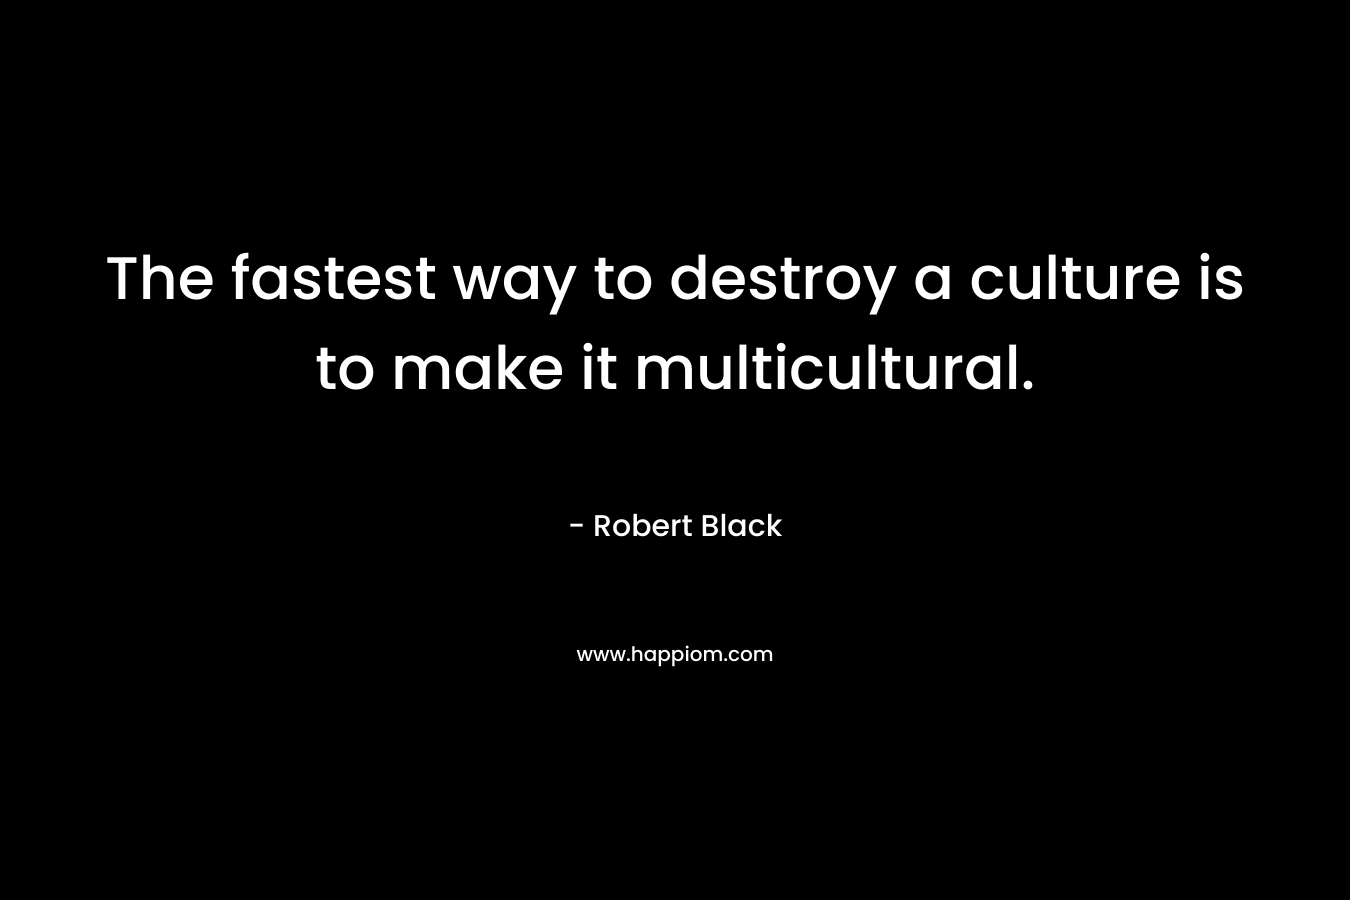 The fastest way to destroy a culture is to make it multicultural.